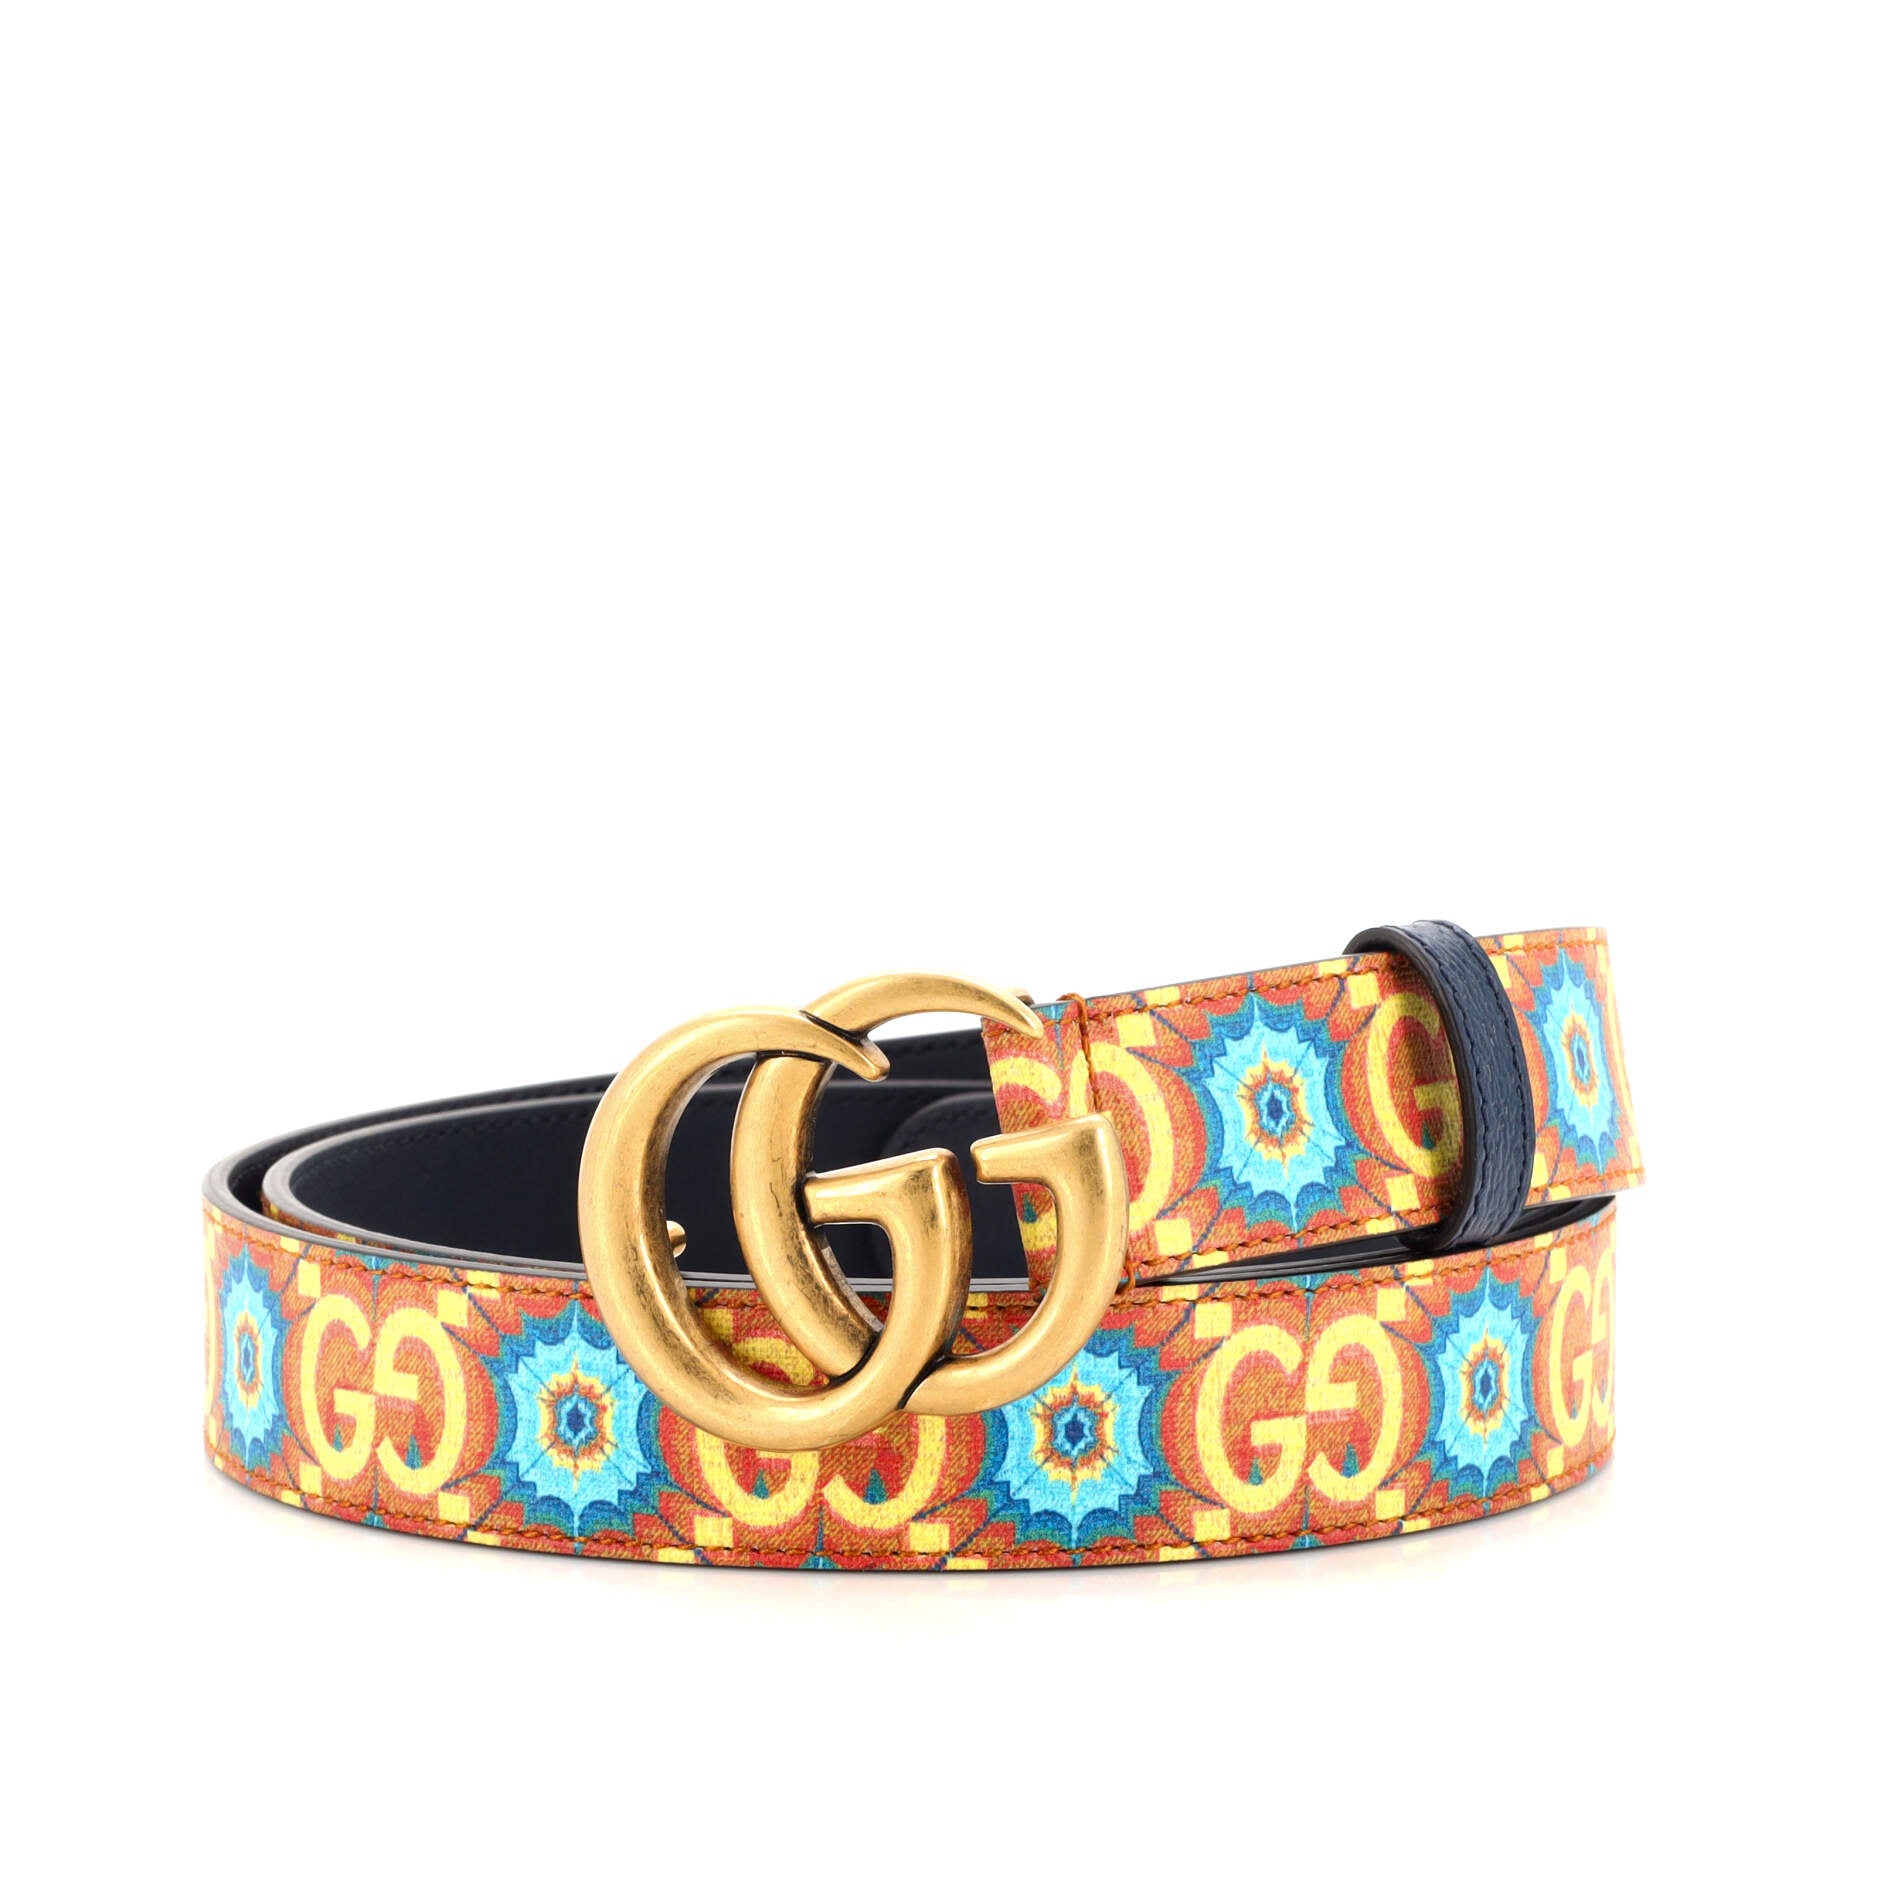 Gucci GG Supreme Belt with G Buckle in Multicolor Canvas Multiple